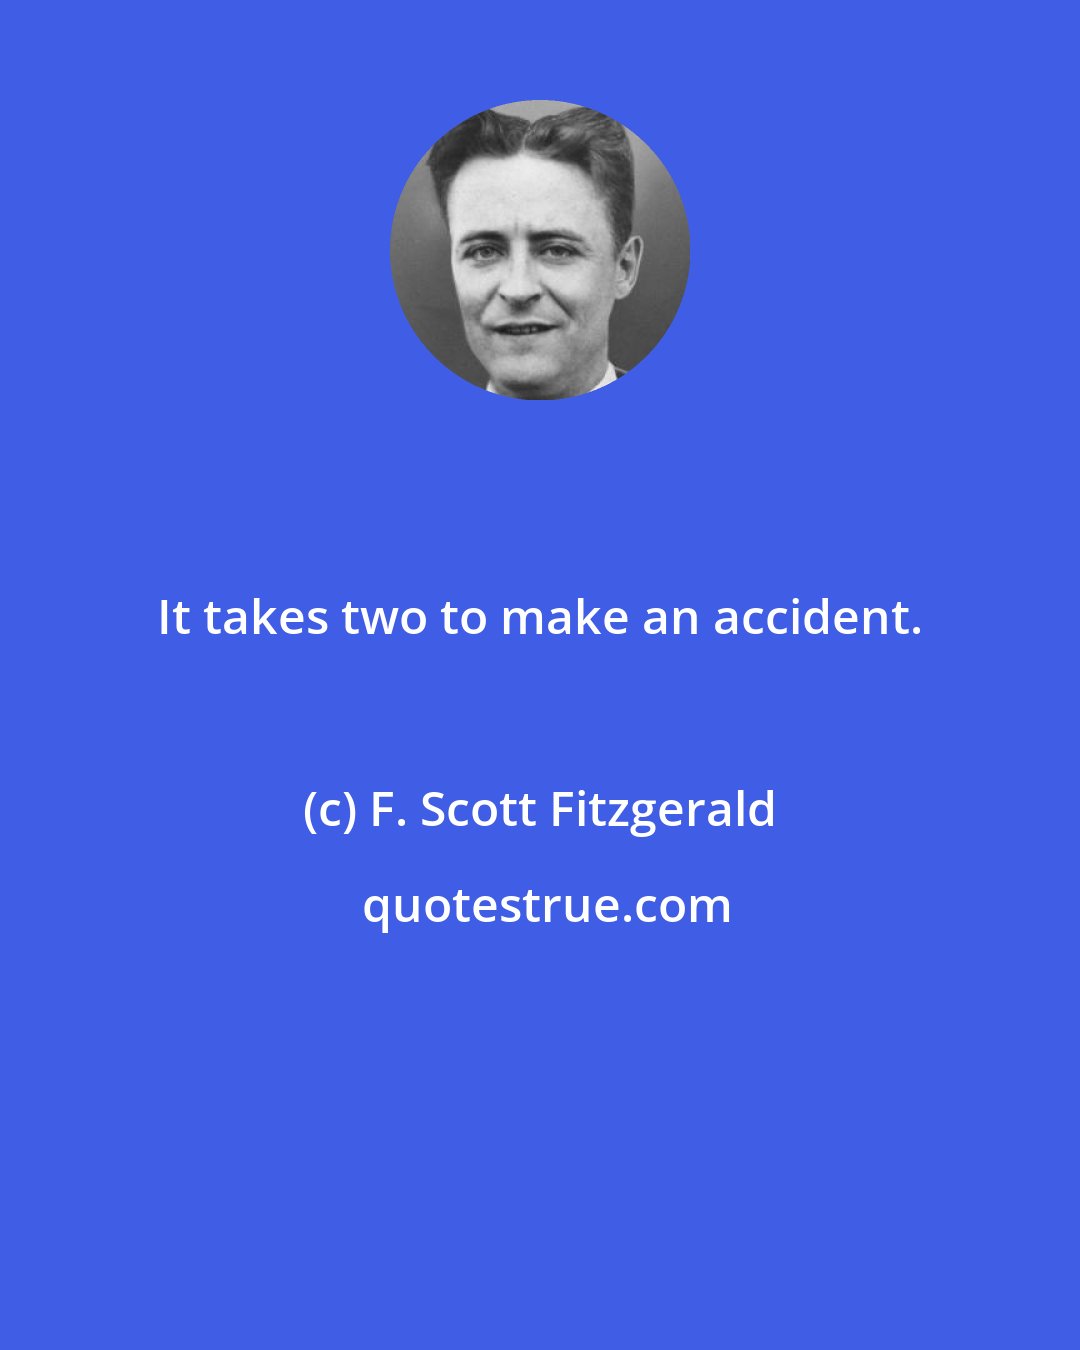 F. Scott Fitzgerald: It takes two to make an accident.